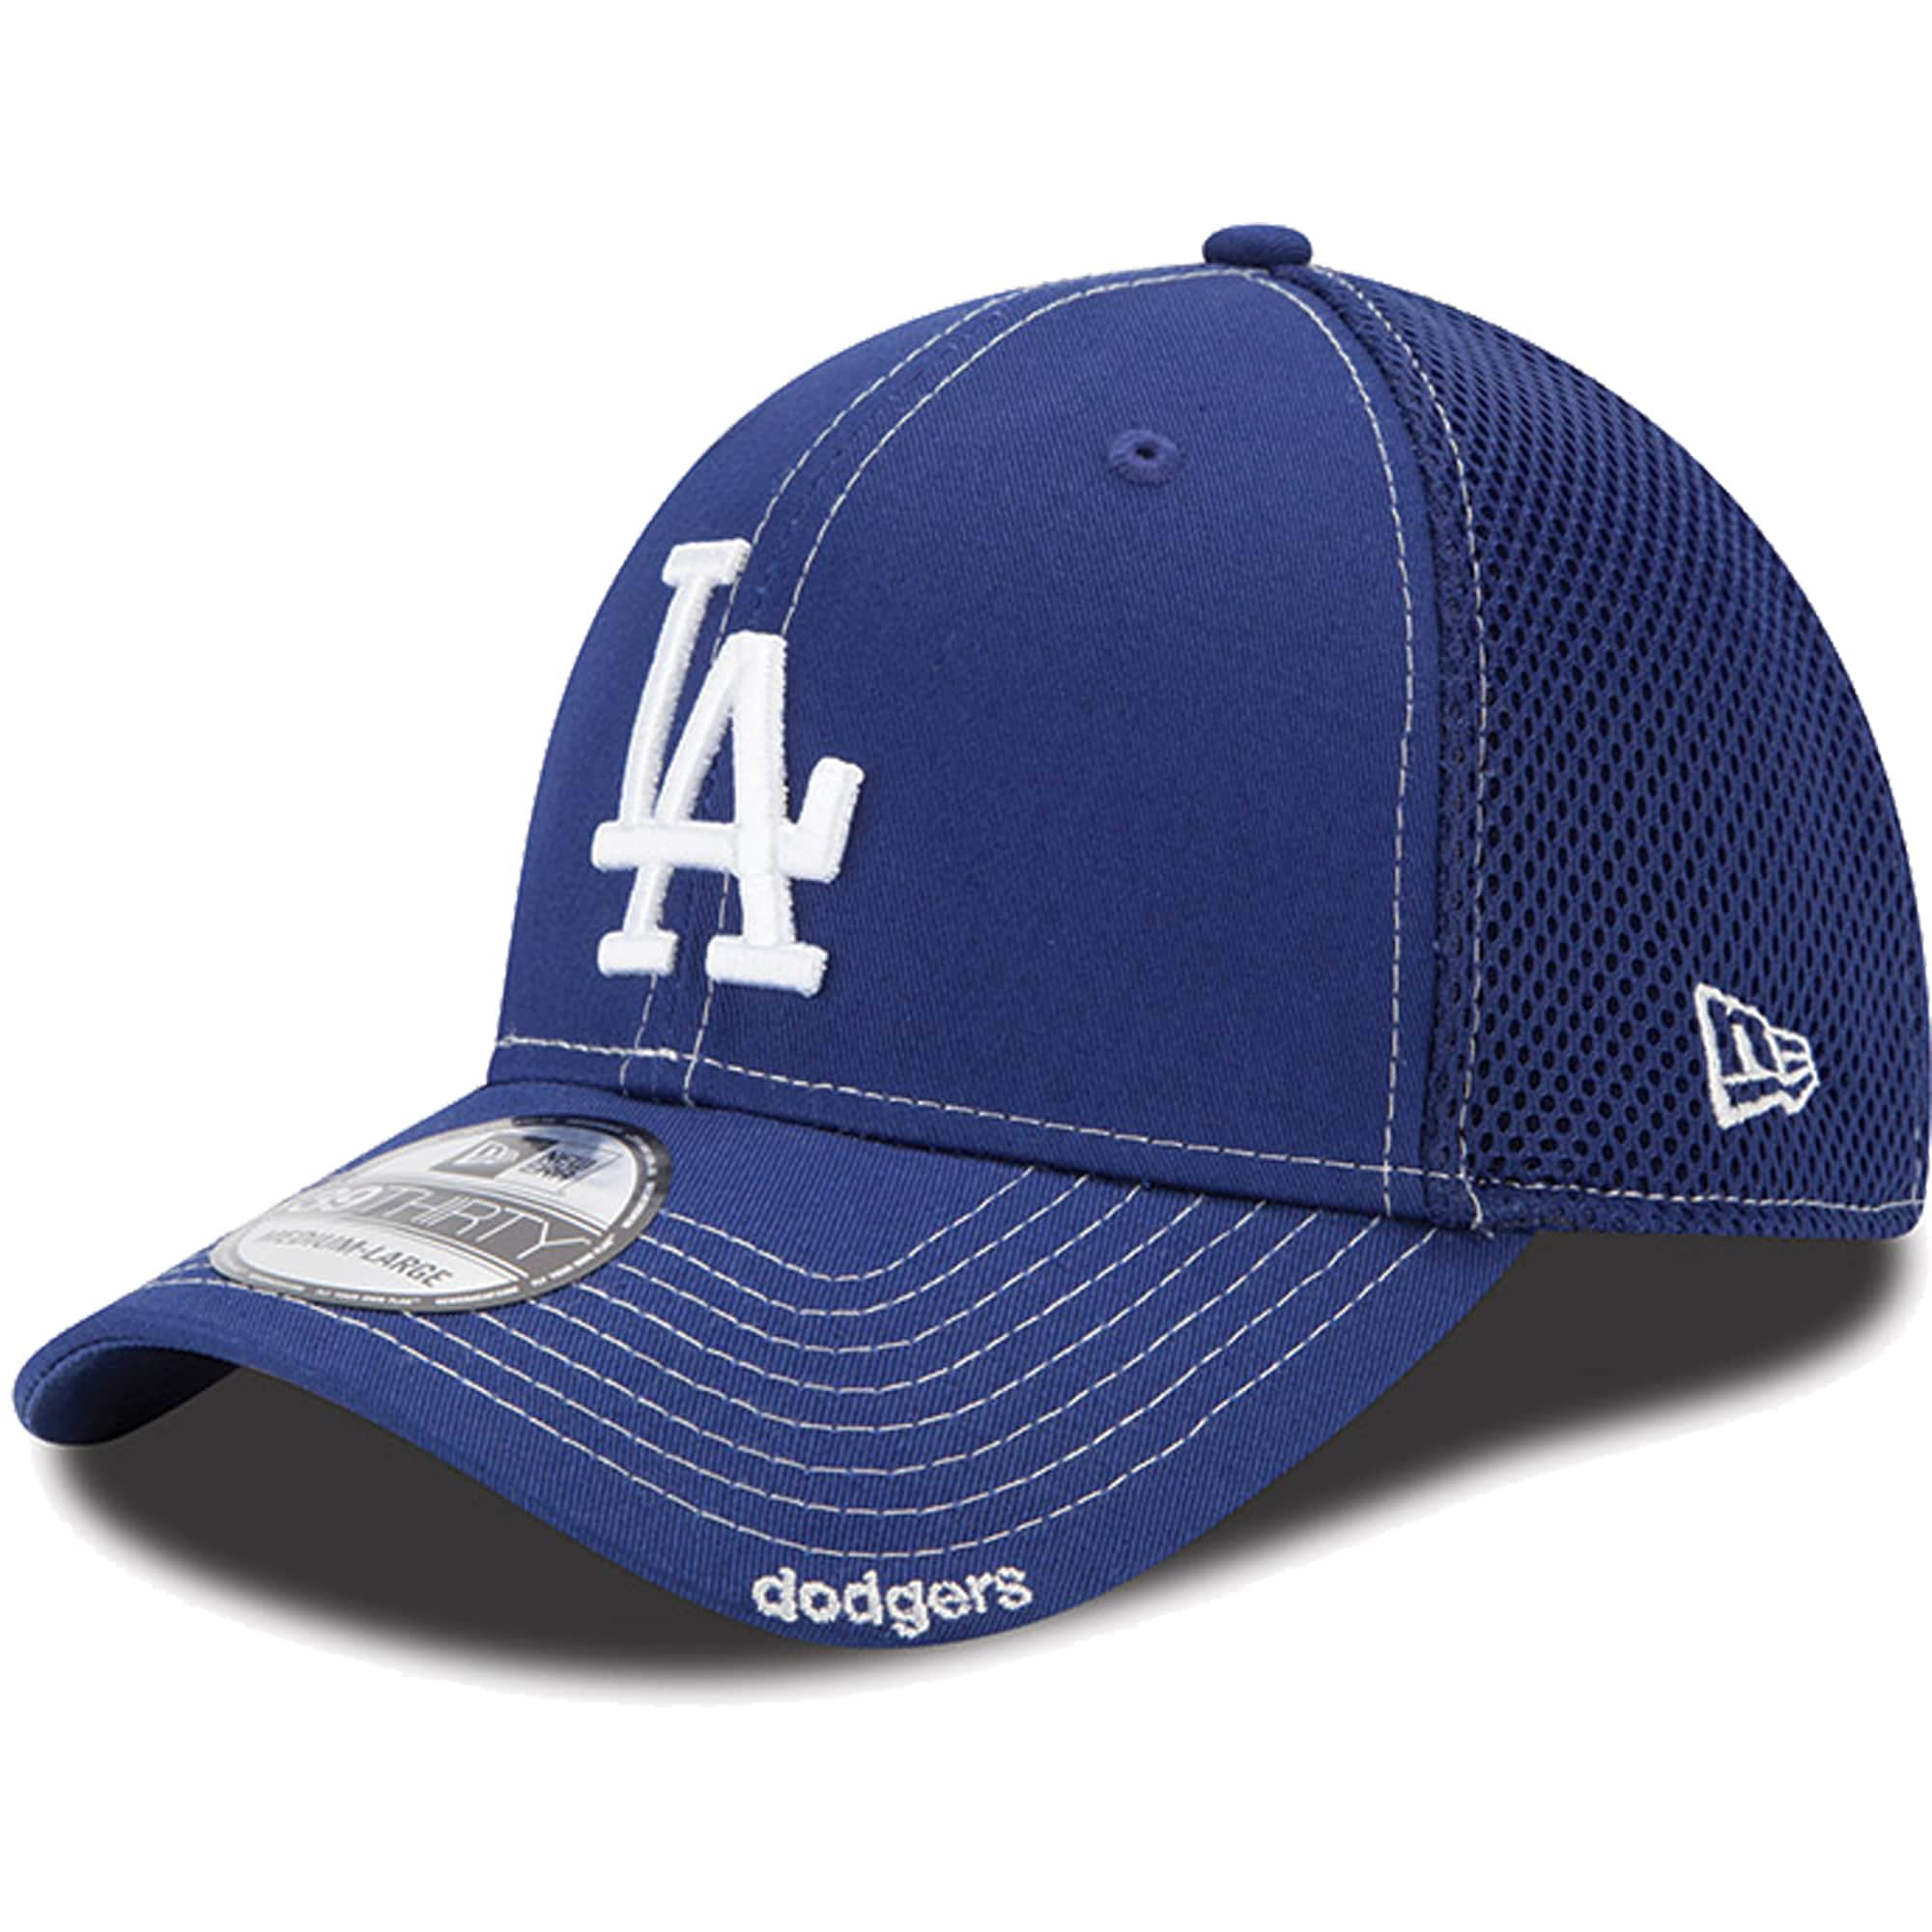 New Era Los Angeles Dodgers Royal Blue Neo 39THIRTY Stretch Fit Hat